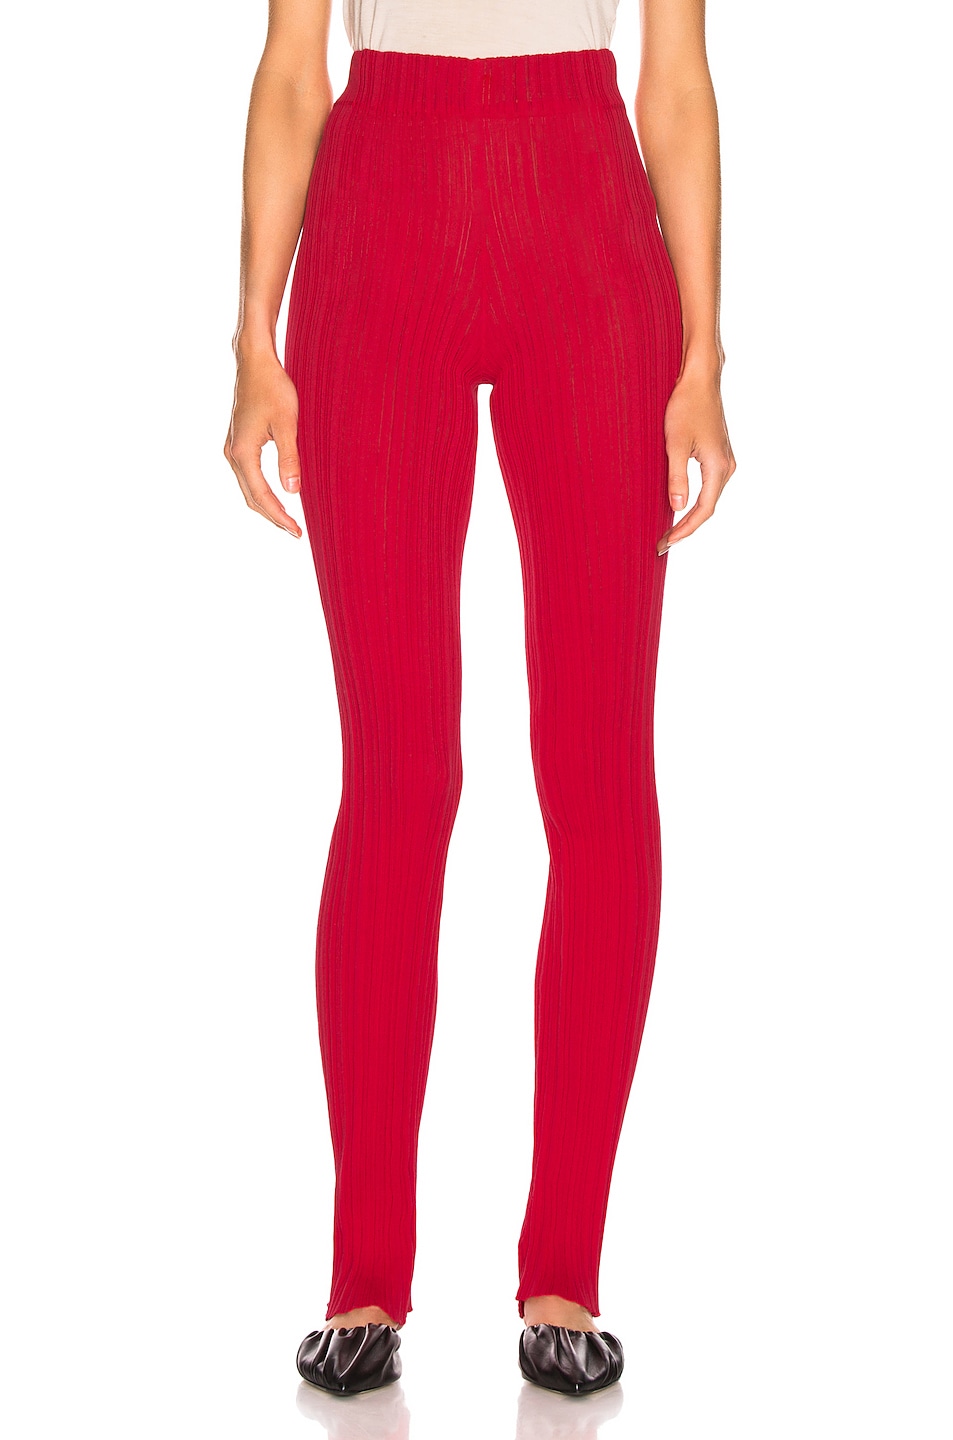 Image 1 of Acne Studios Keera Pant in Tomato Red